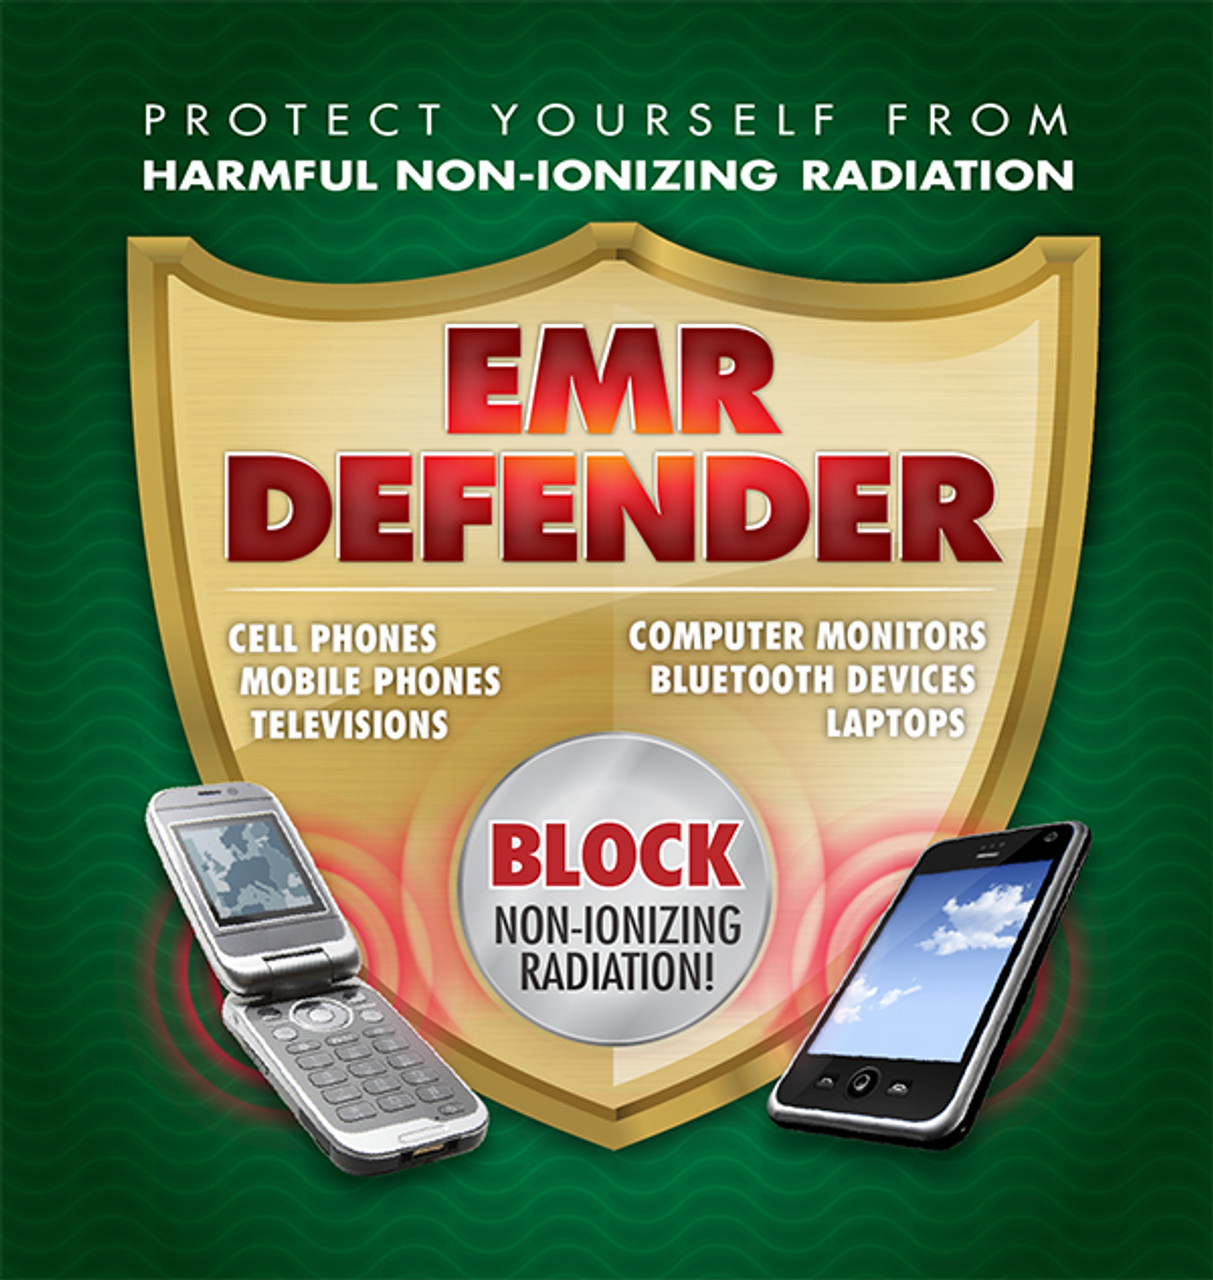 EMR Defender - protect yourself from harmful, non-ionizing radiation - AphaBio Centrix